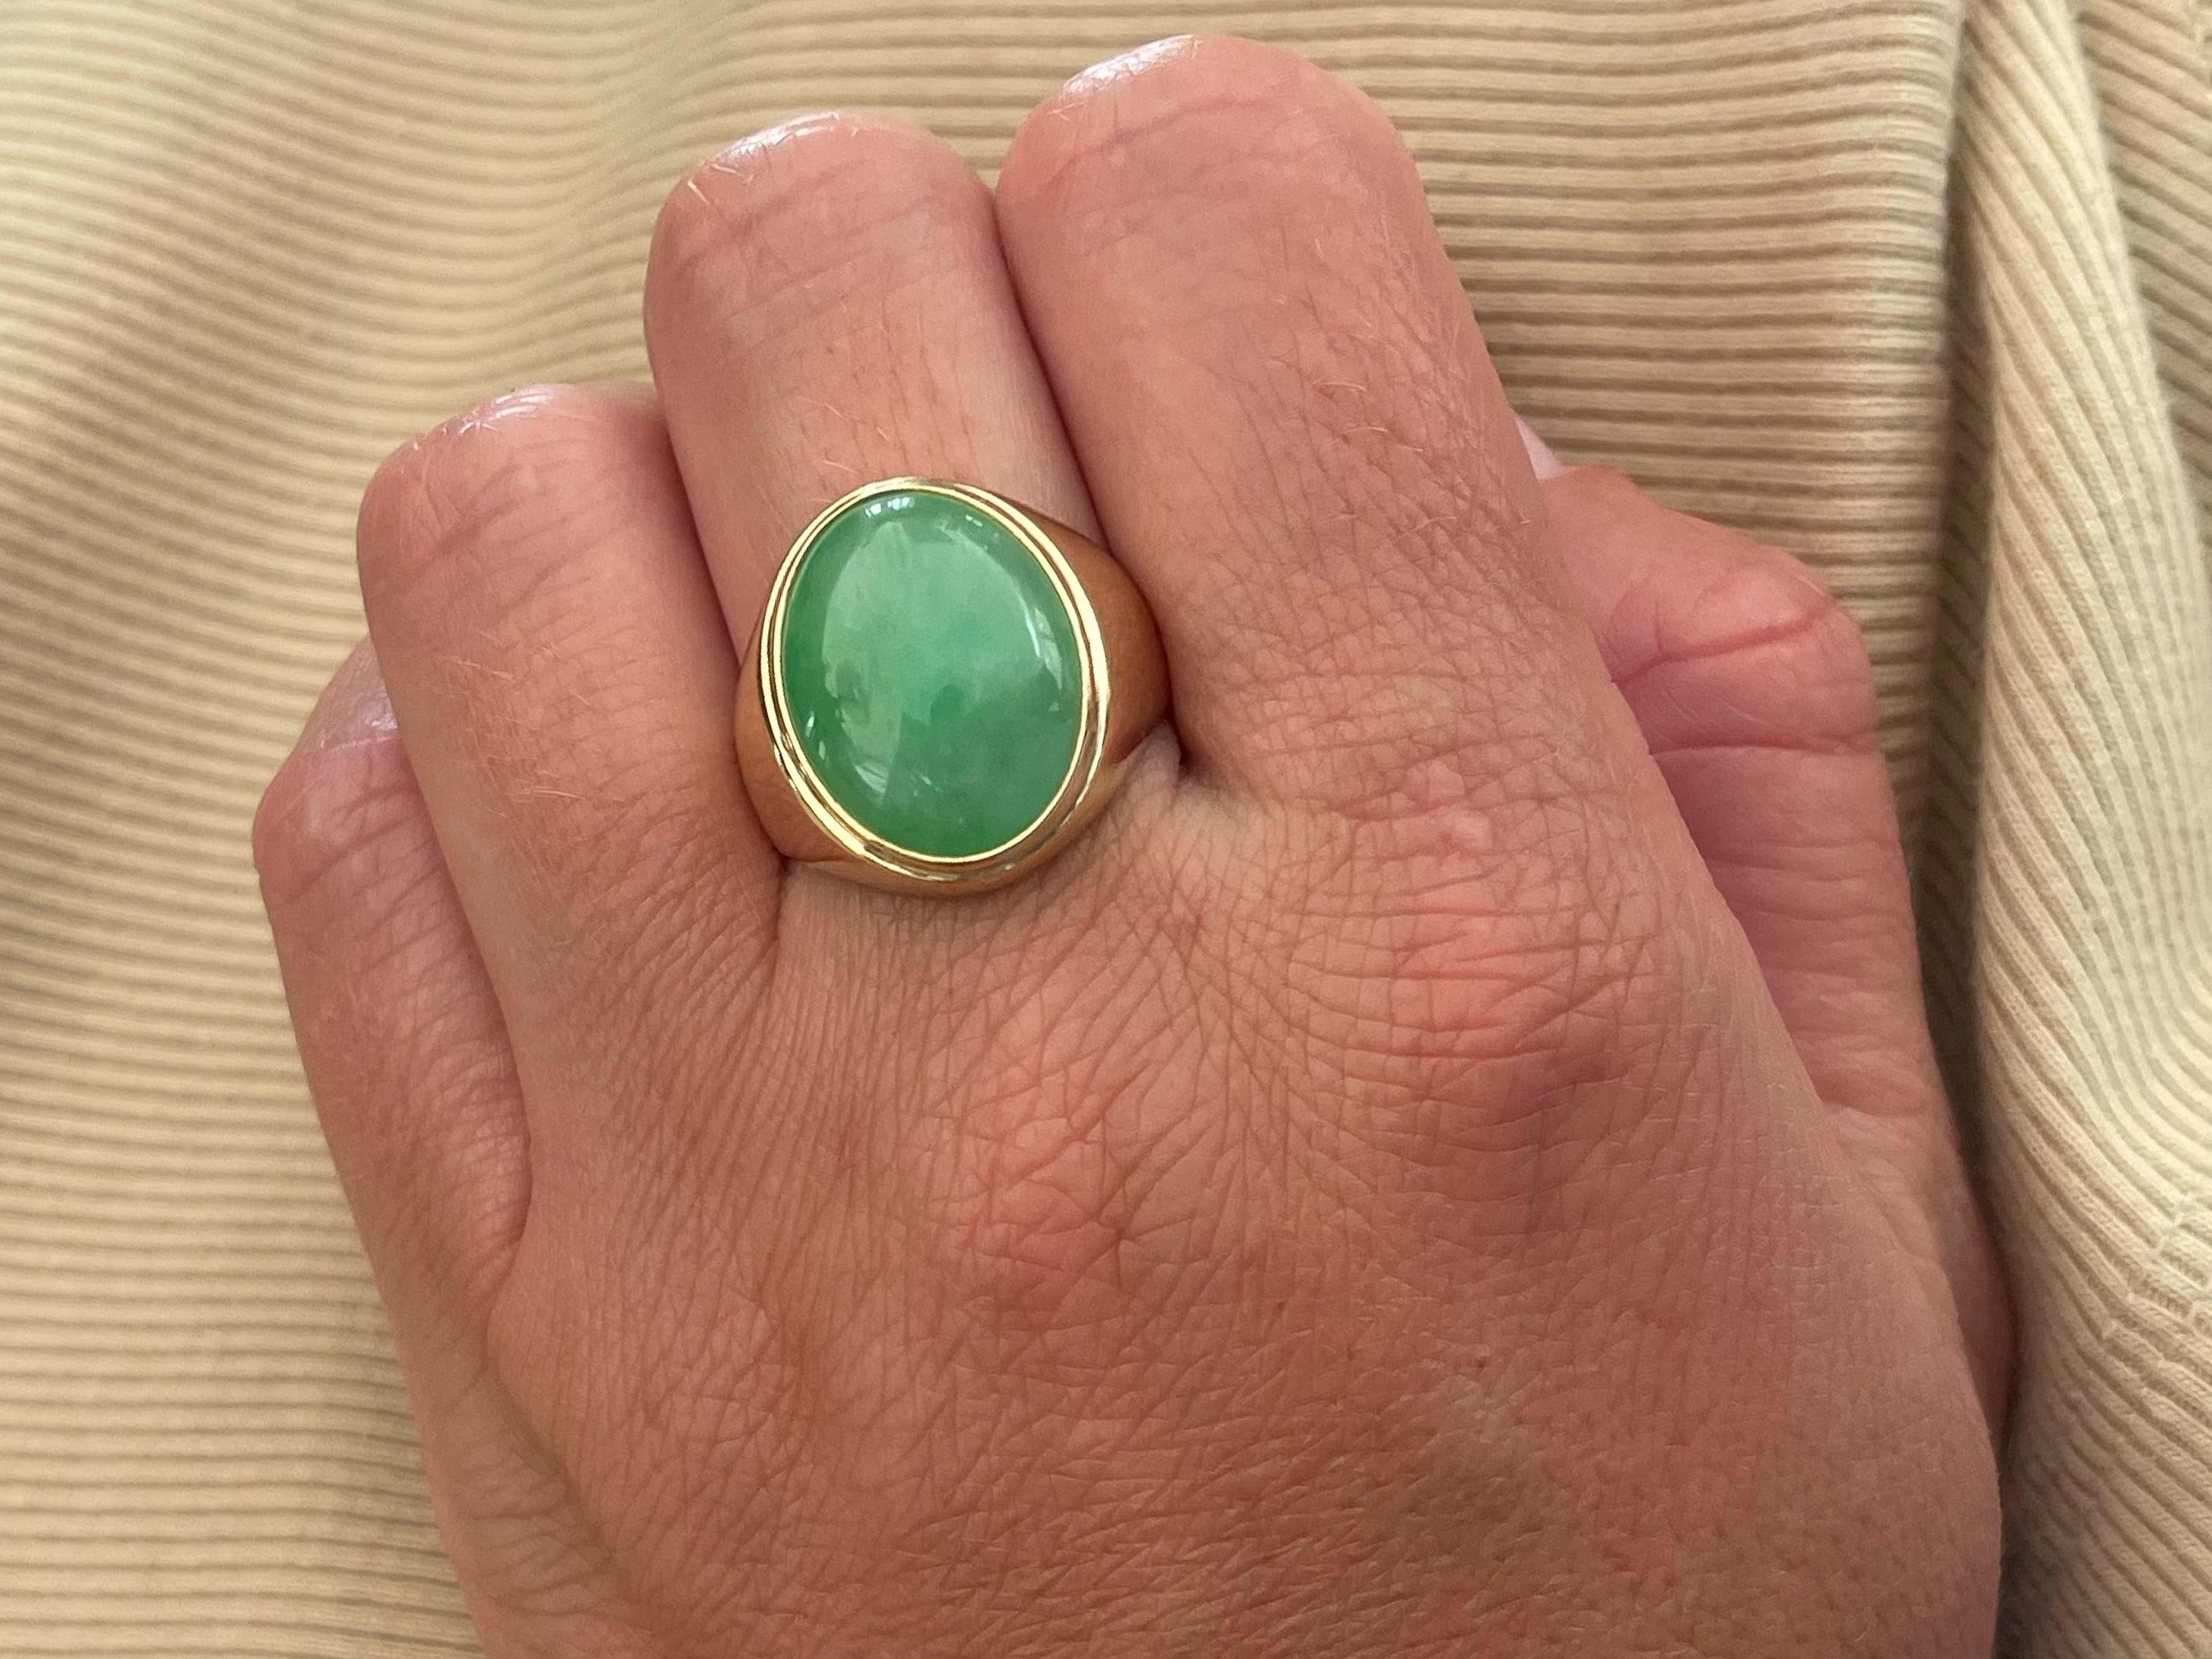 Item Specifications:

Metal: 14k Yellow Gold 

Style: Statement Ring

Ring Size: 9 (resizing available for a fee)

Total Weight: 10.5 Grams

Gemstone Specifications:

Center Gemstone: Jadeite Jade

Shape: Oval

Color: Green

Cut: Cabochon

Jade